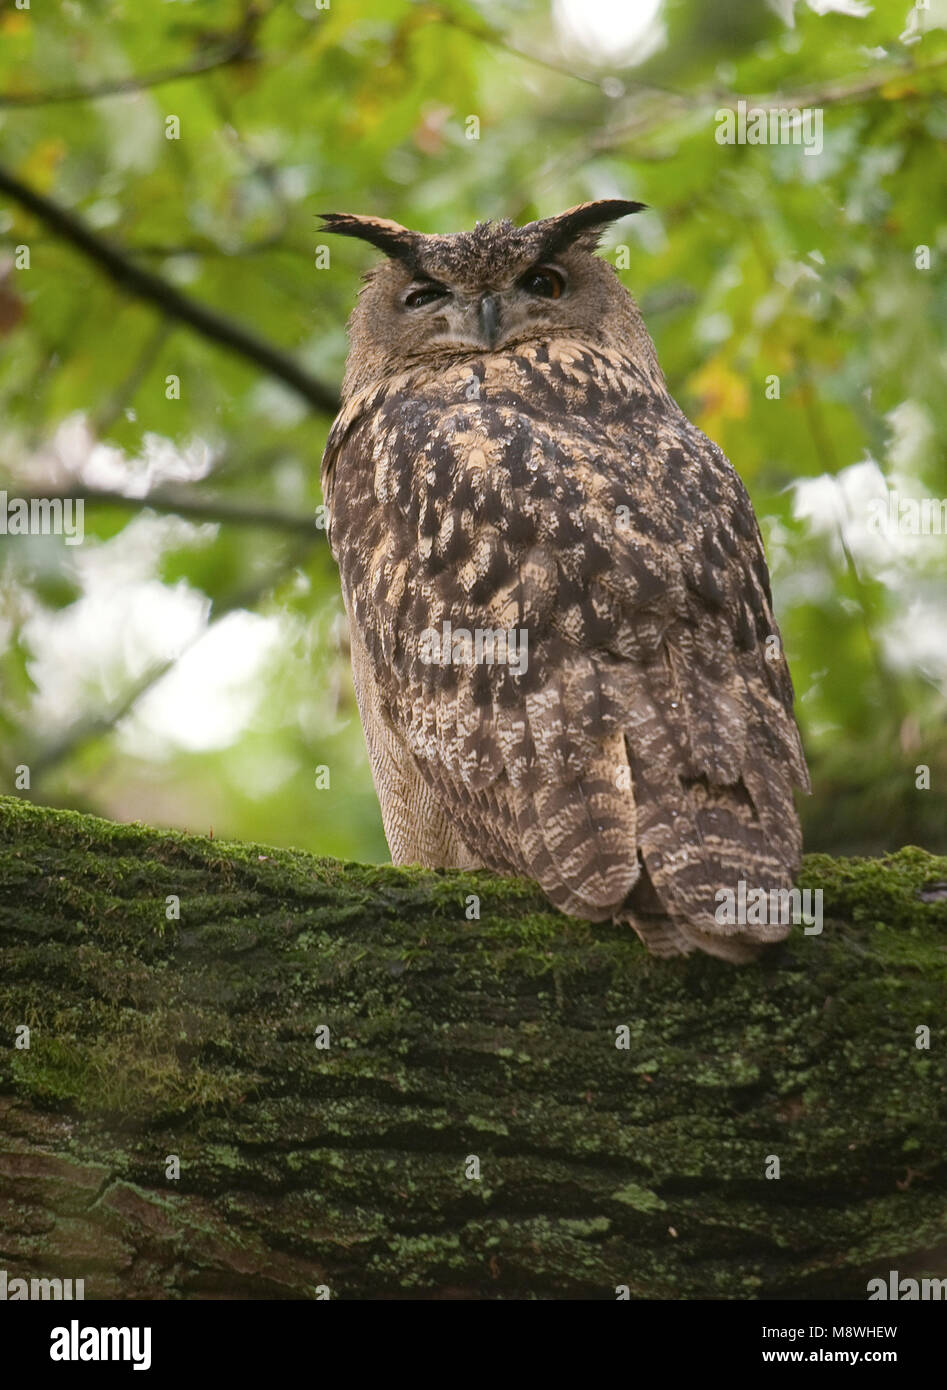 Oehoe zittend in een boom; Eurasian Eagle Owl perched in a tree Stock Photo